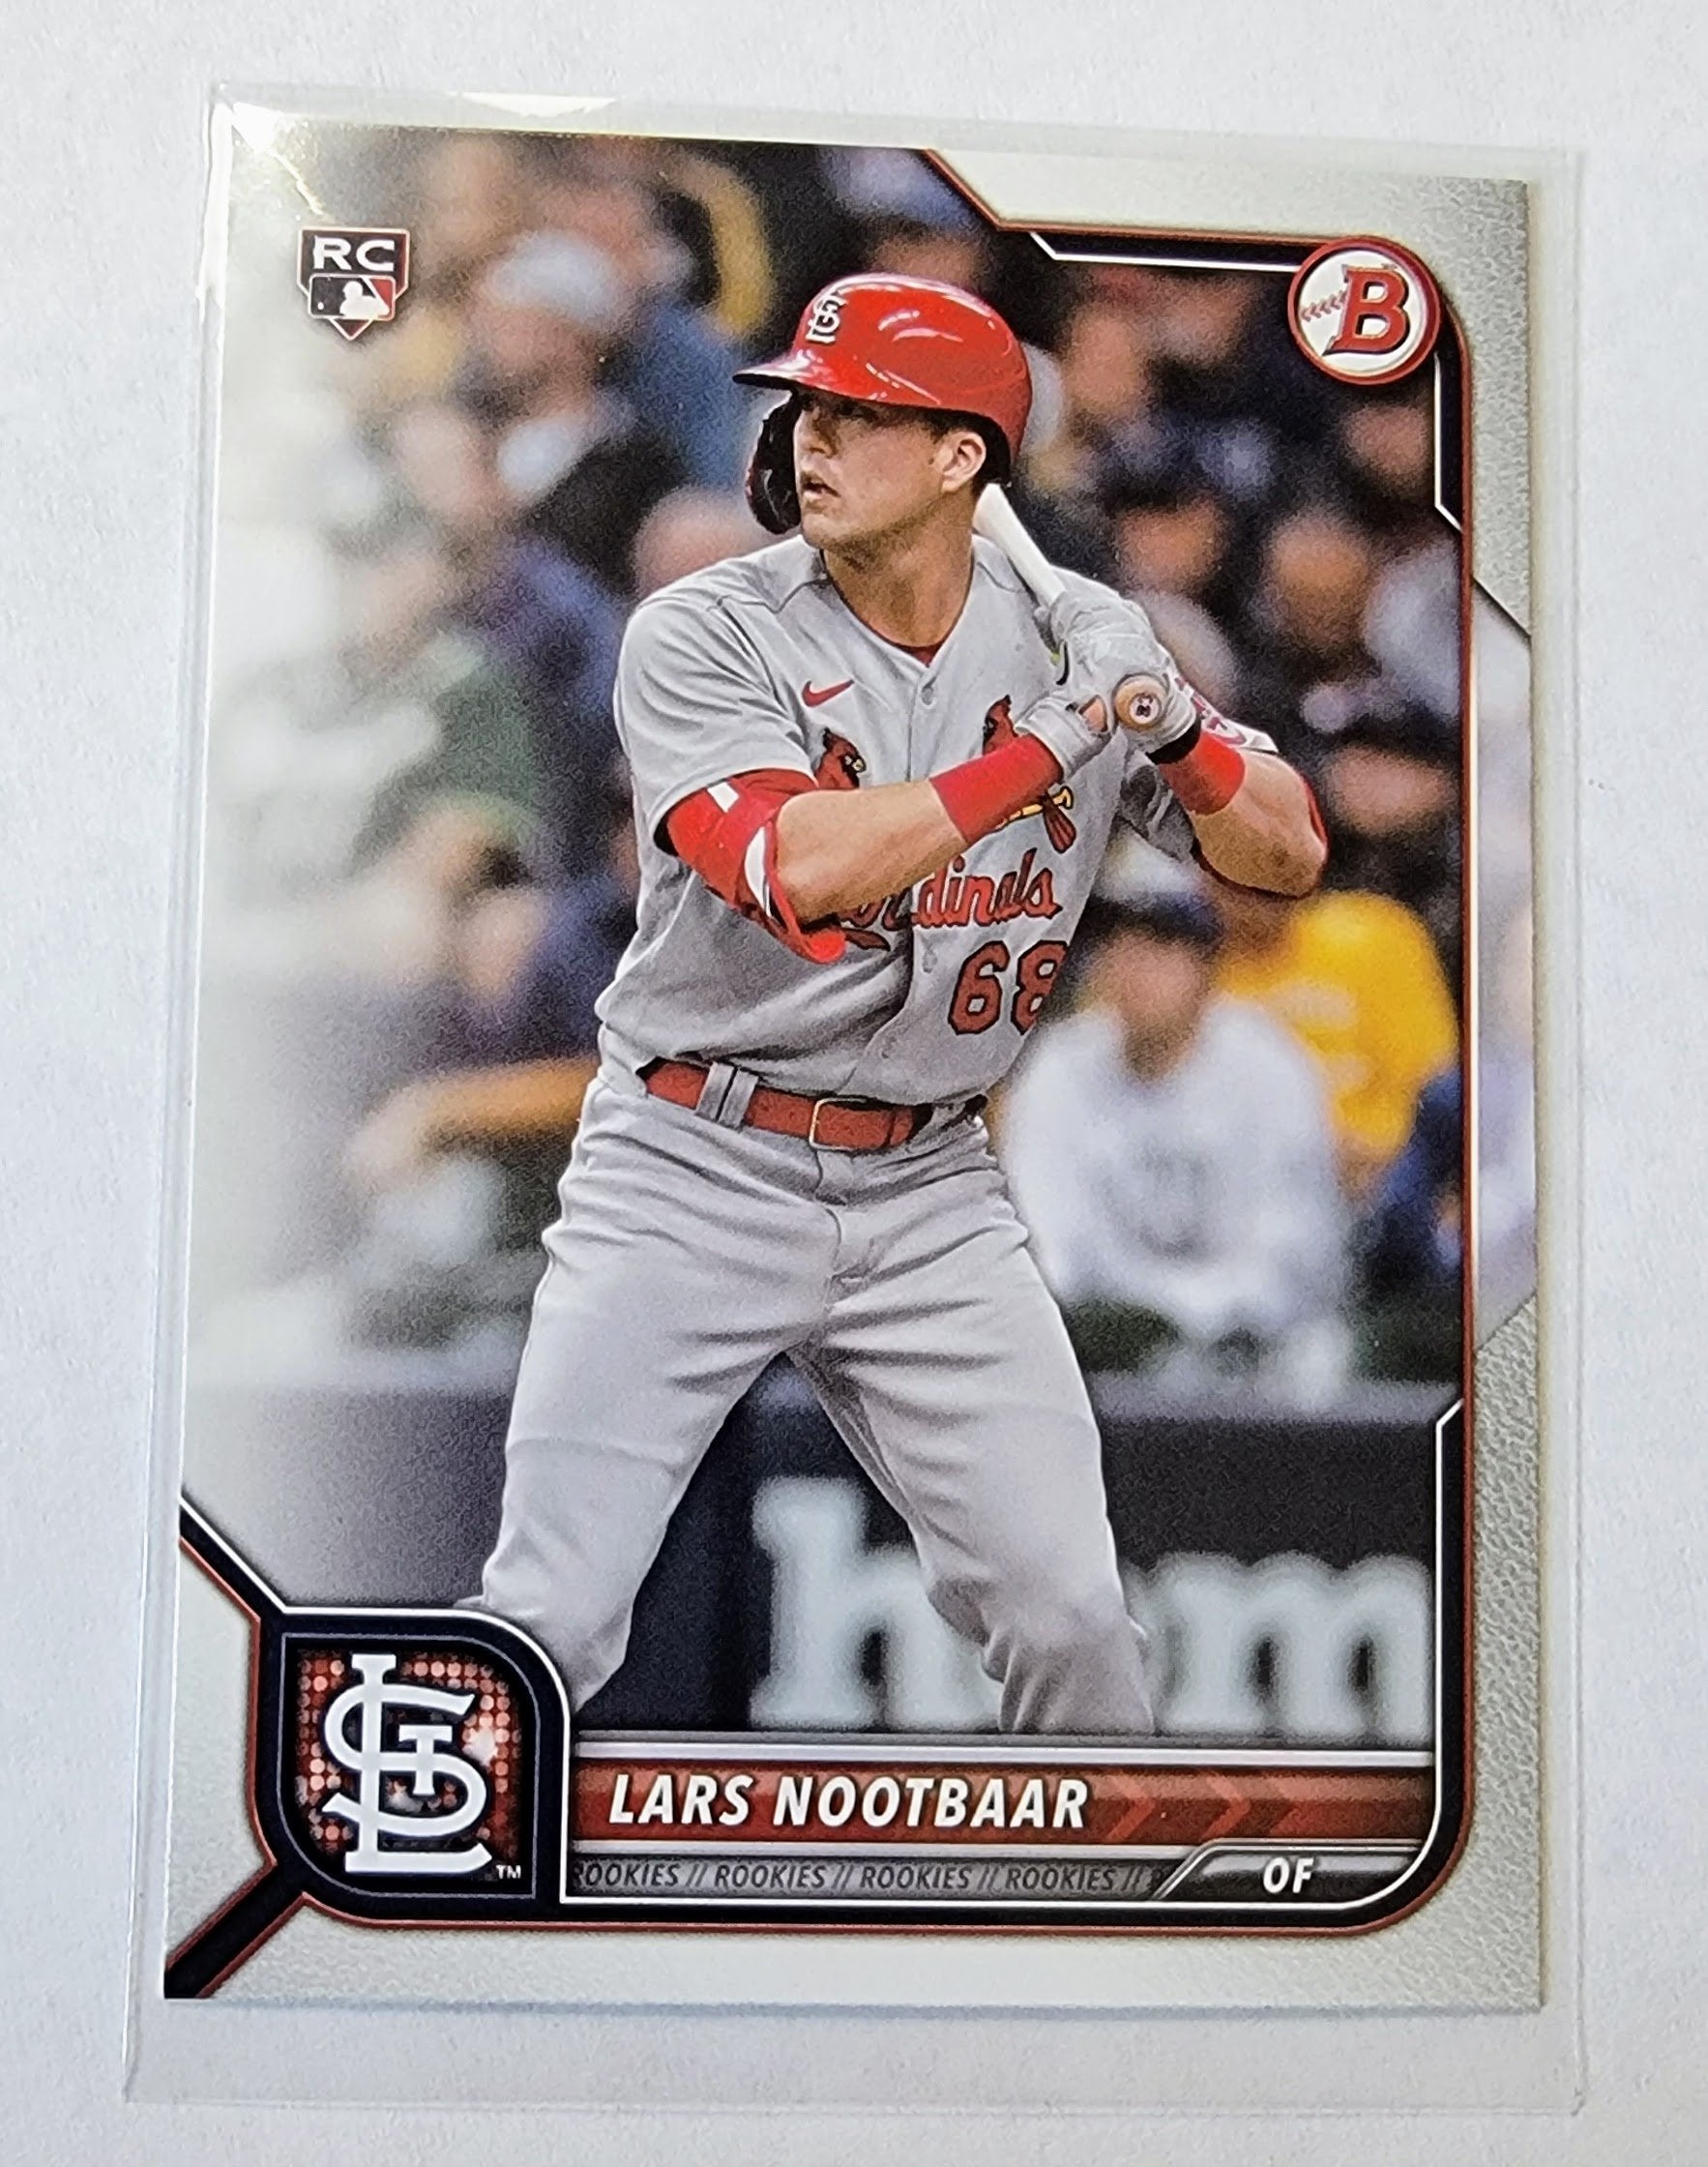 2022 Bowman Lars Nootbar Rookie Baseball Trading Card SMCB1 simple Xclusive Collectibles   